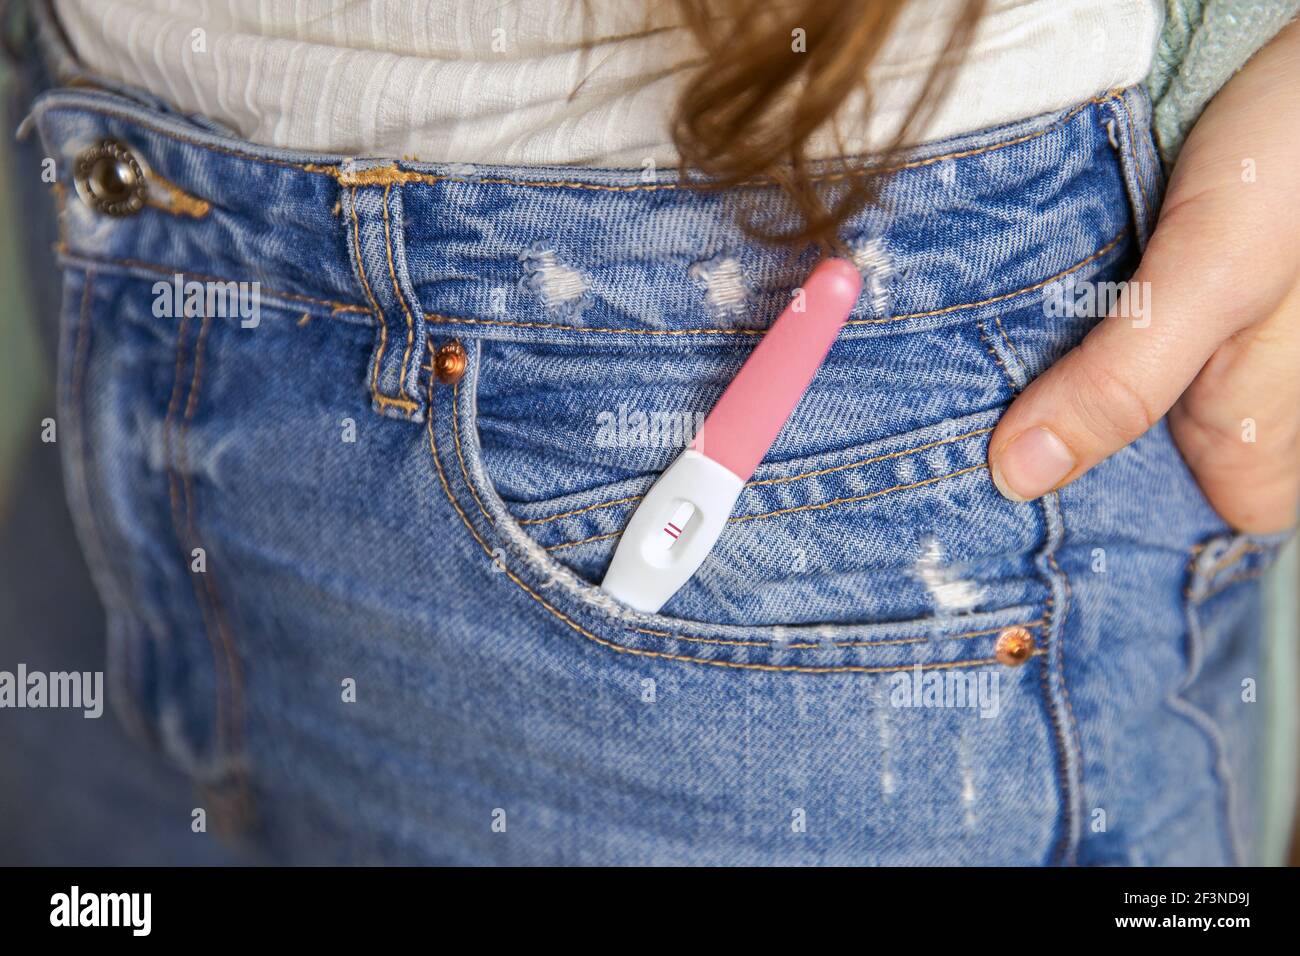 Young woman with positive pregnancy test in pocket of jeans close-up Stock Photo